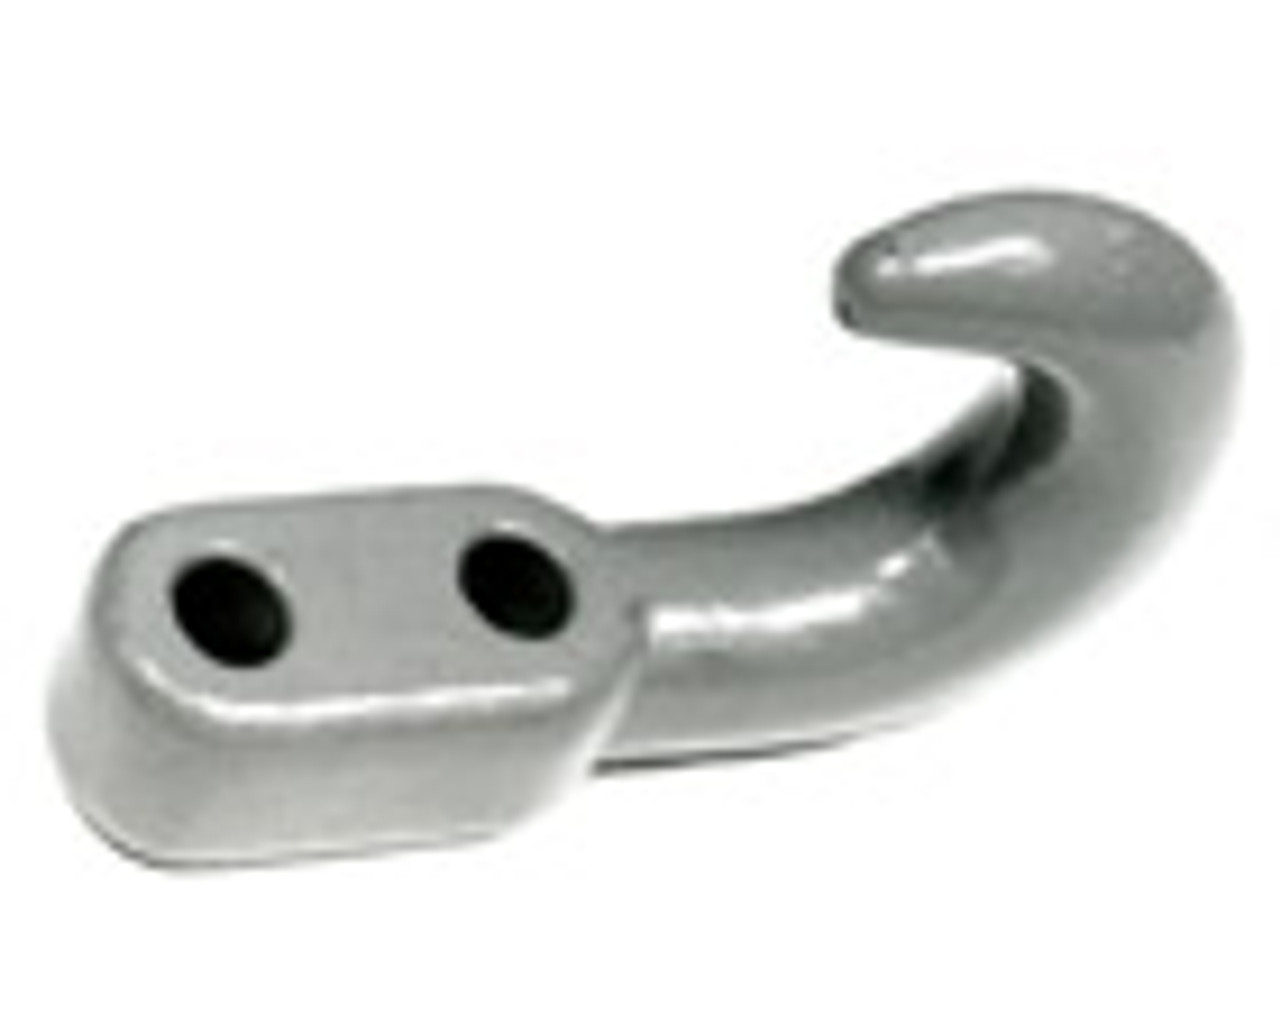 Tow Hook- 5 Ton Capacity- Black- Wallace Forge 2316208 / 0-58